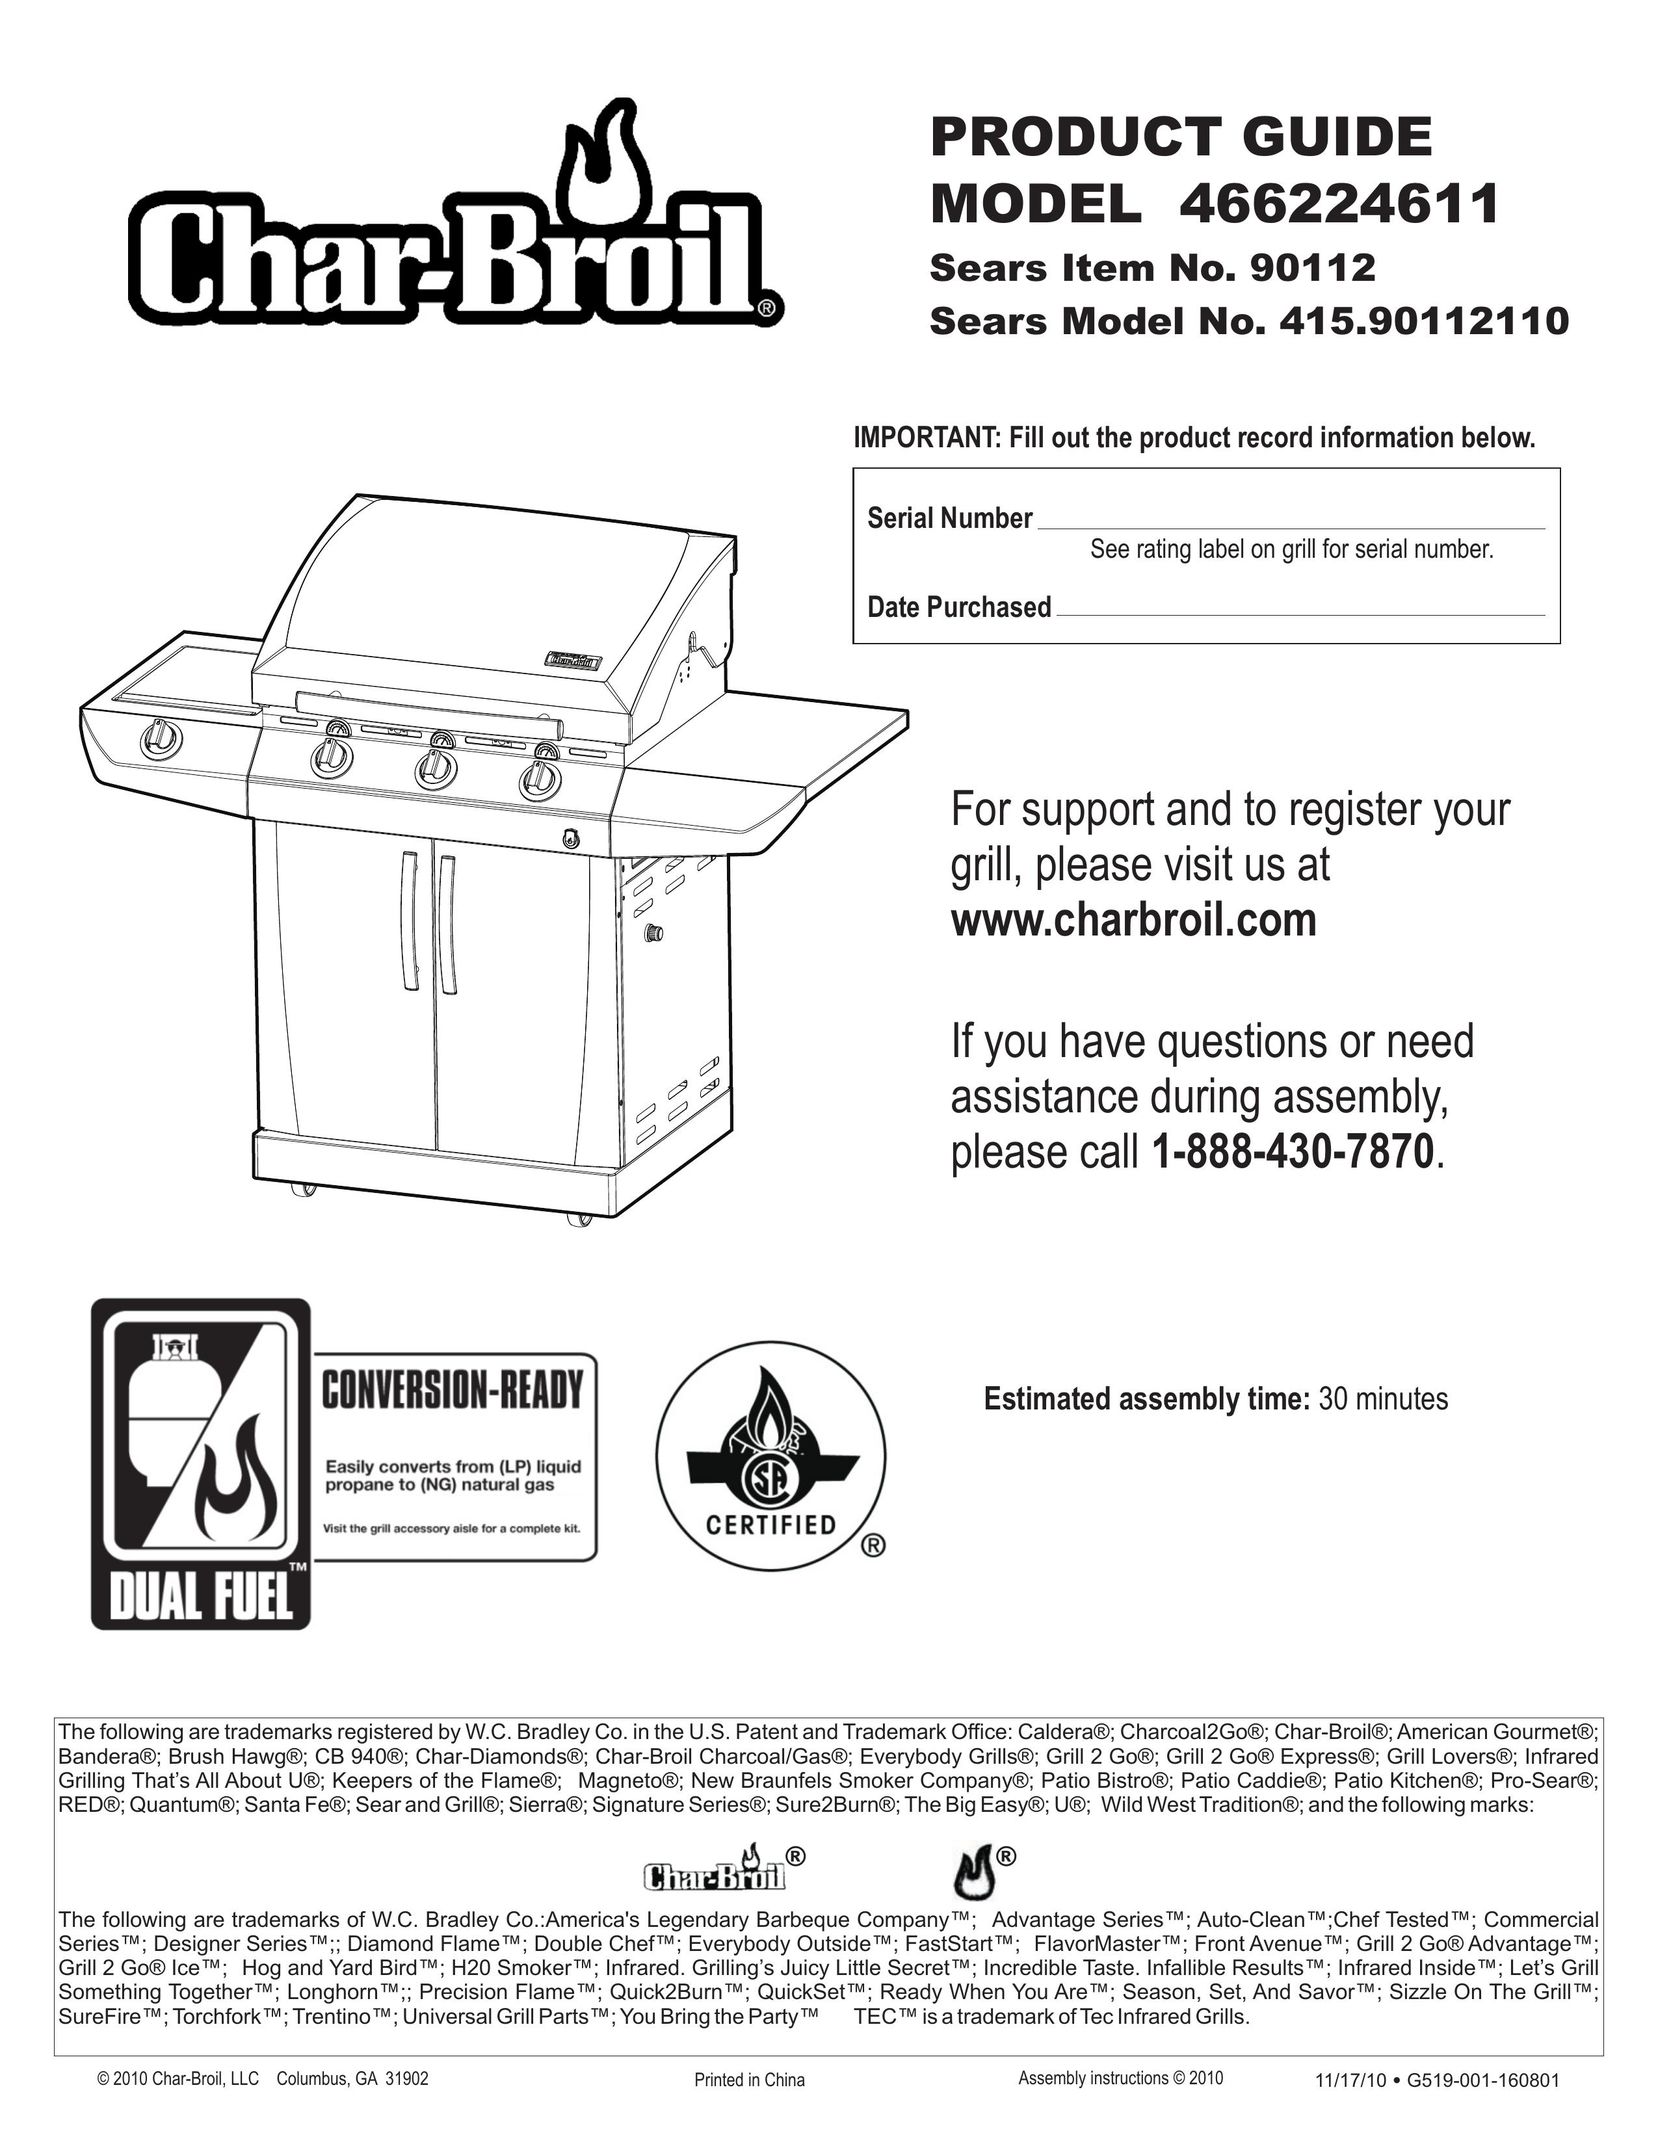 Char-Broil 415.9011211 Convection Oven User Manual